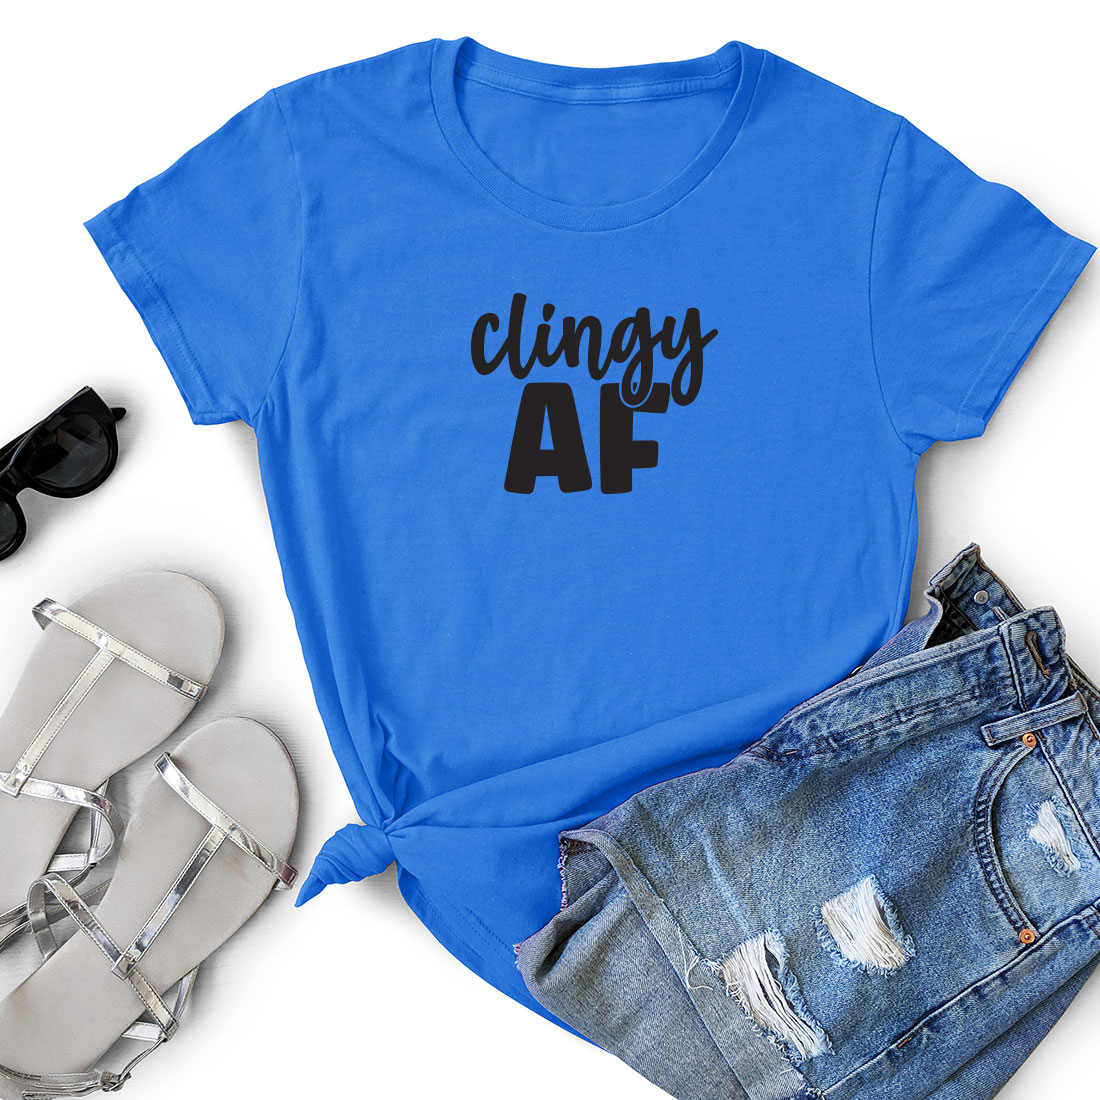 T - shirt that says clings af next to a pair of shorts.